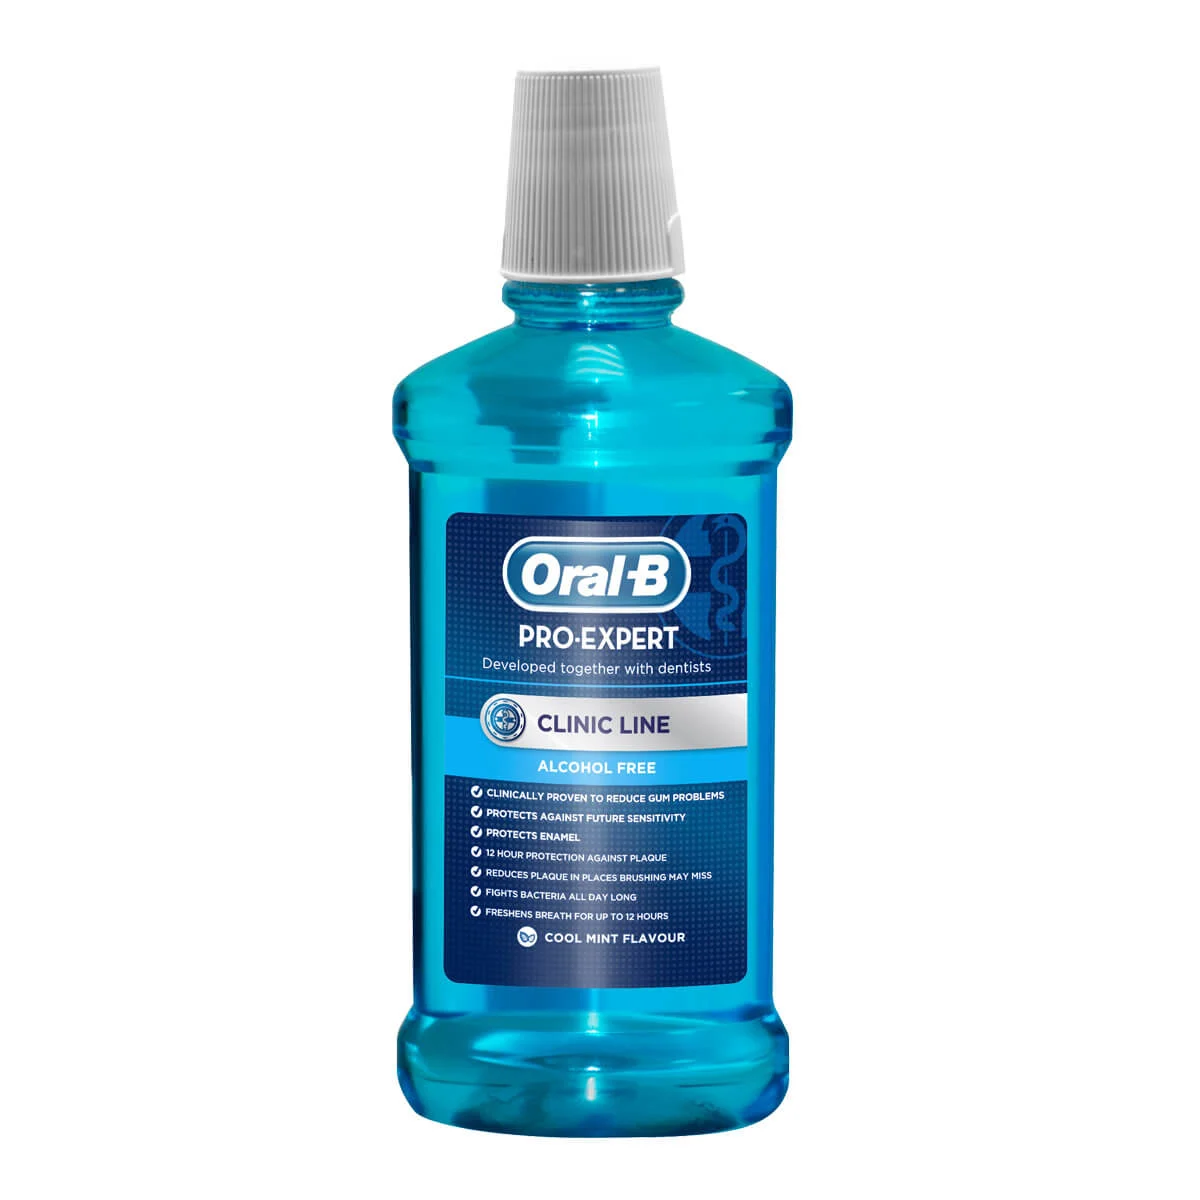 Oral-B Pro-Expert Clinic Line Mouthwash undefined